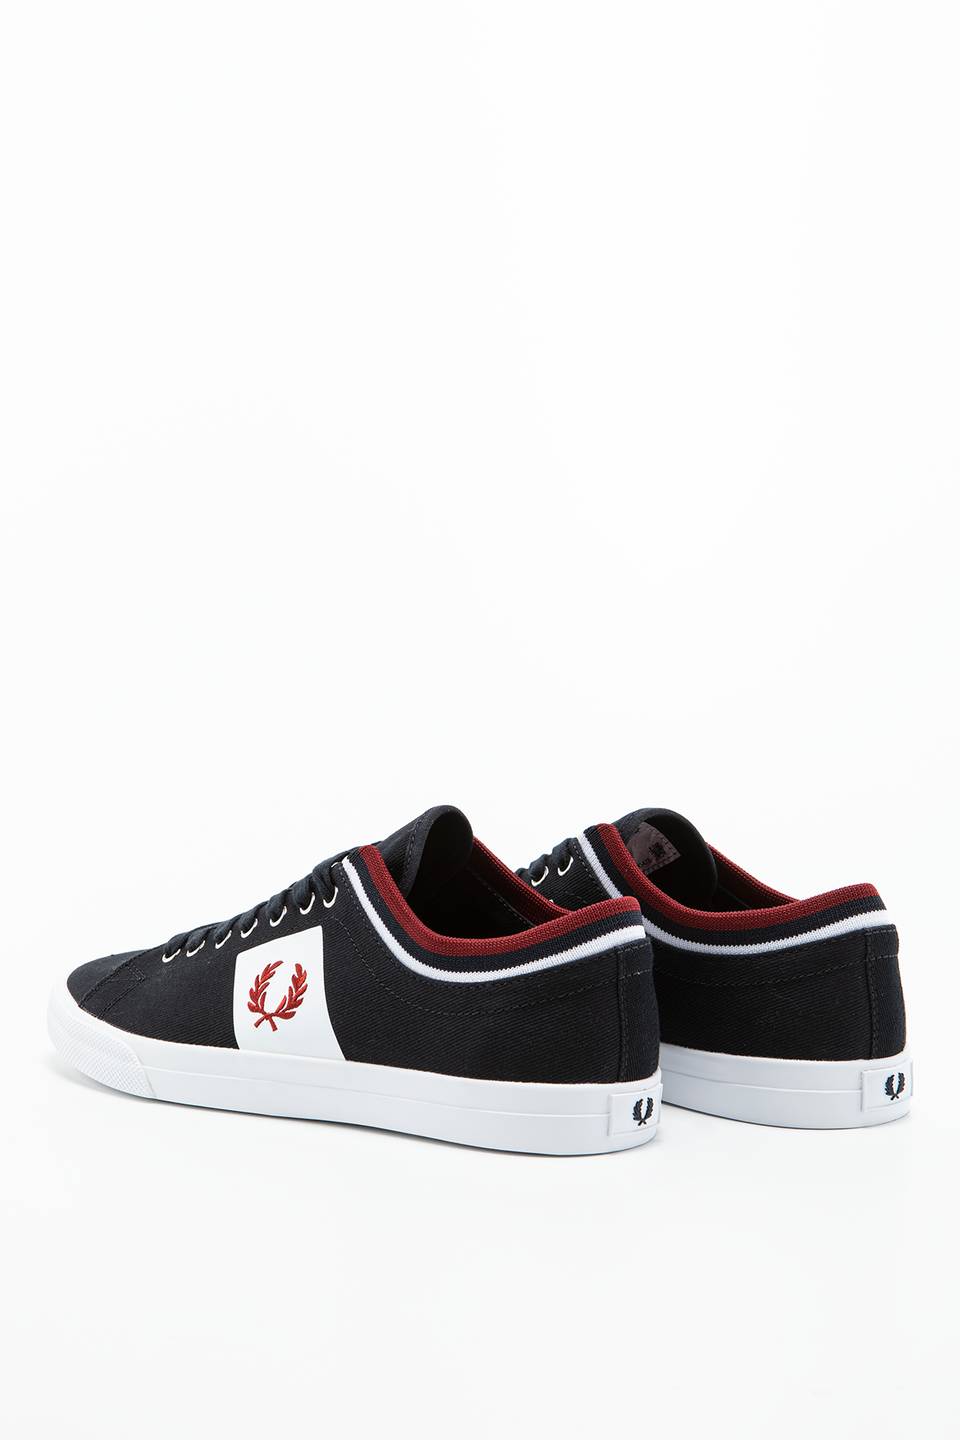 Sneakers Fred Perry UNDERSPIN TIPPED CUFF TWILL B7106-608